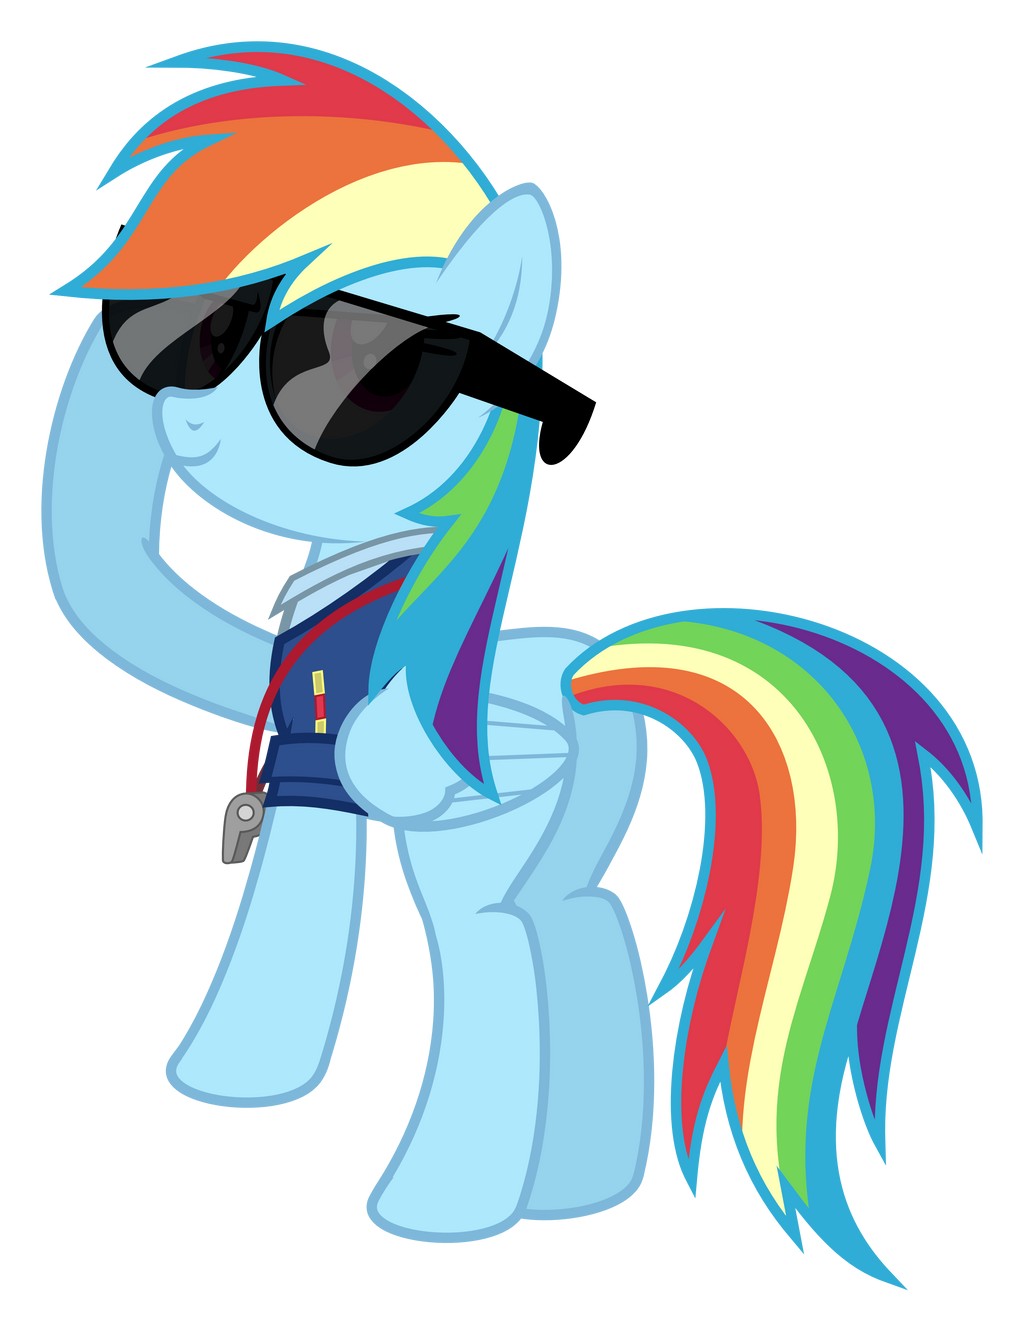 officer_rainbow_dash_by_hankofficer-d5q0oea.png